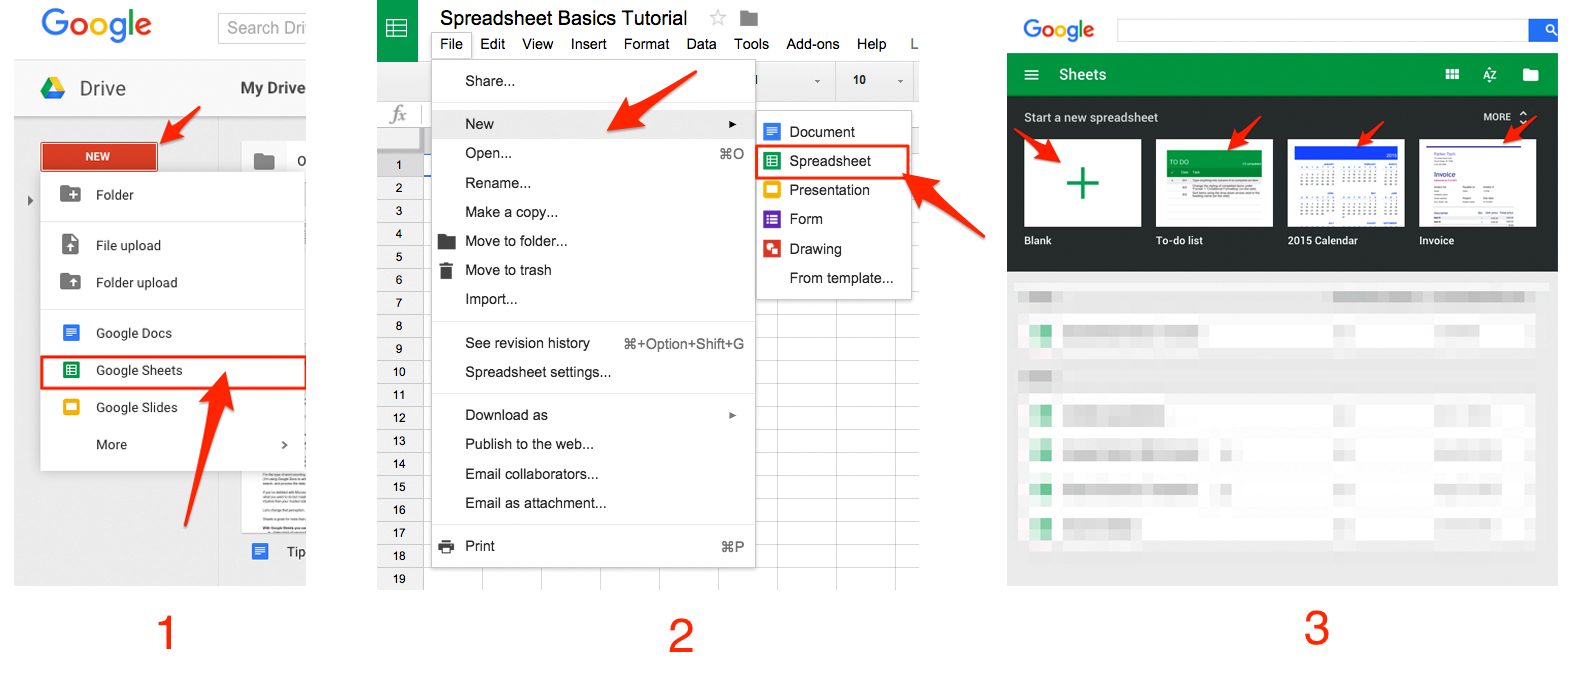 How Do I Make An Excel Spreadsheet Intended For Google Sheets 101: The Beginner's Guide To Online Spreadsheets  The